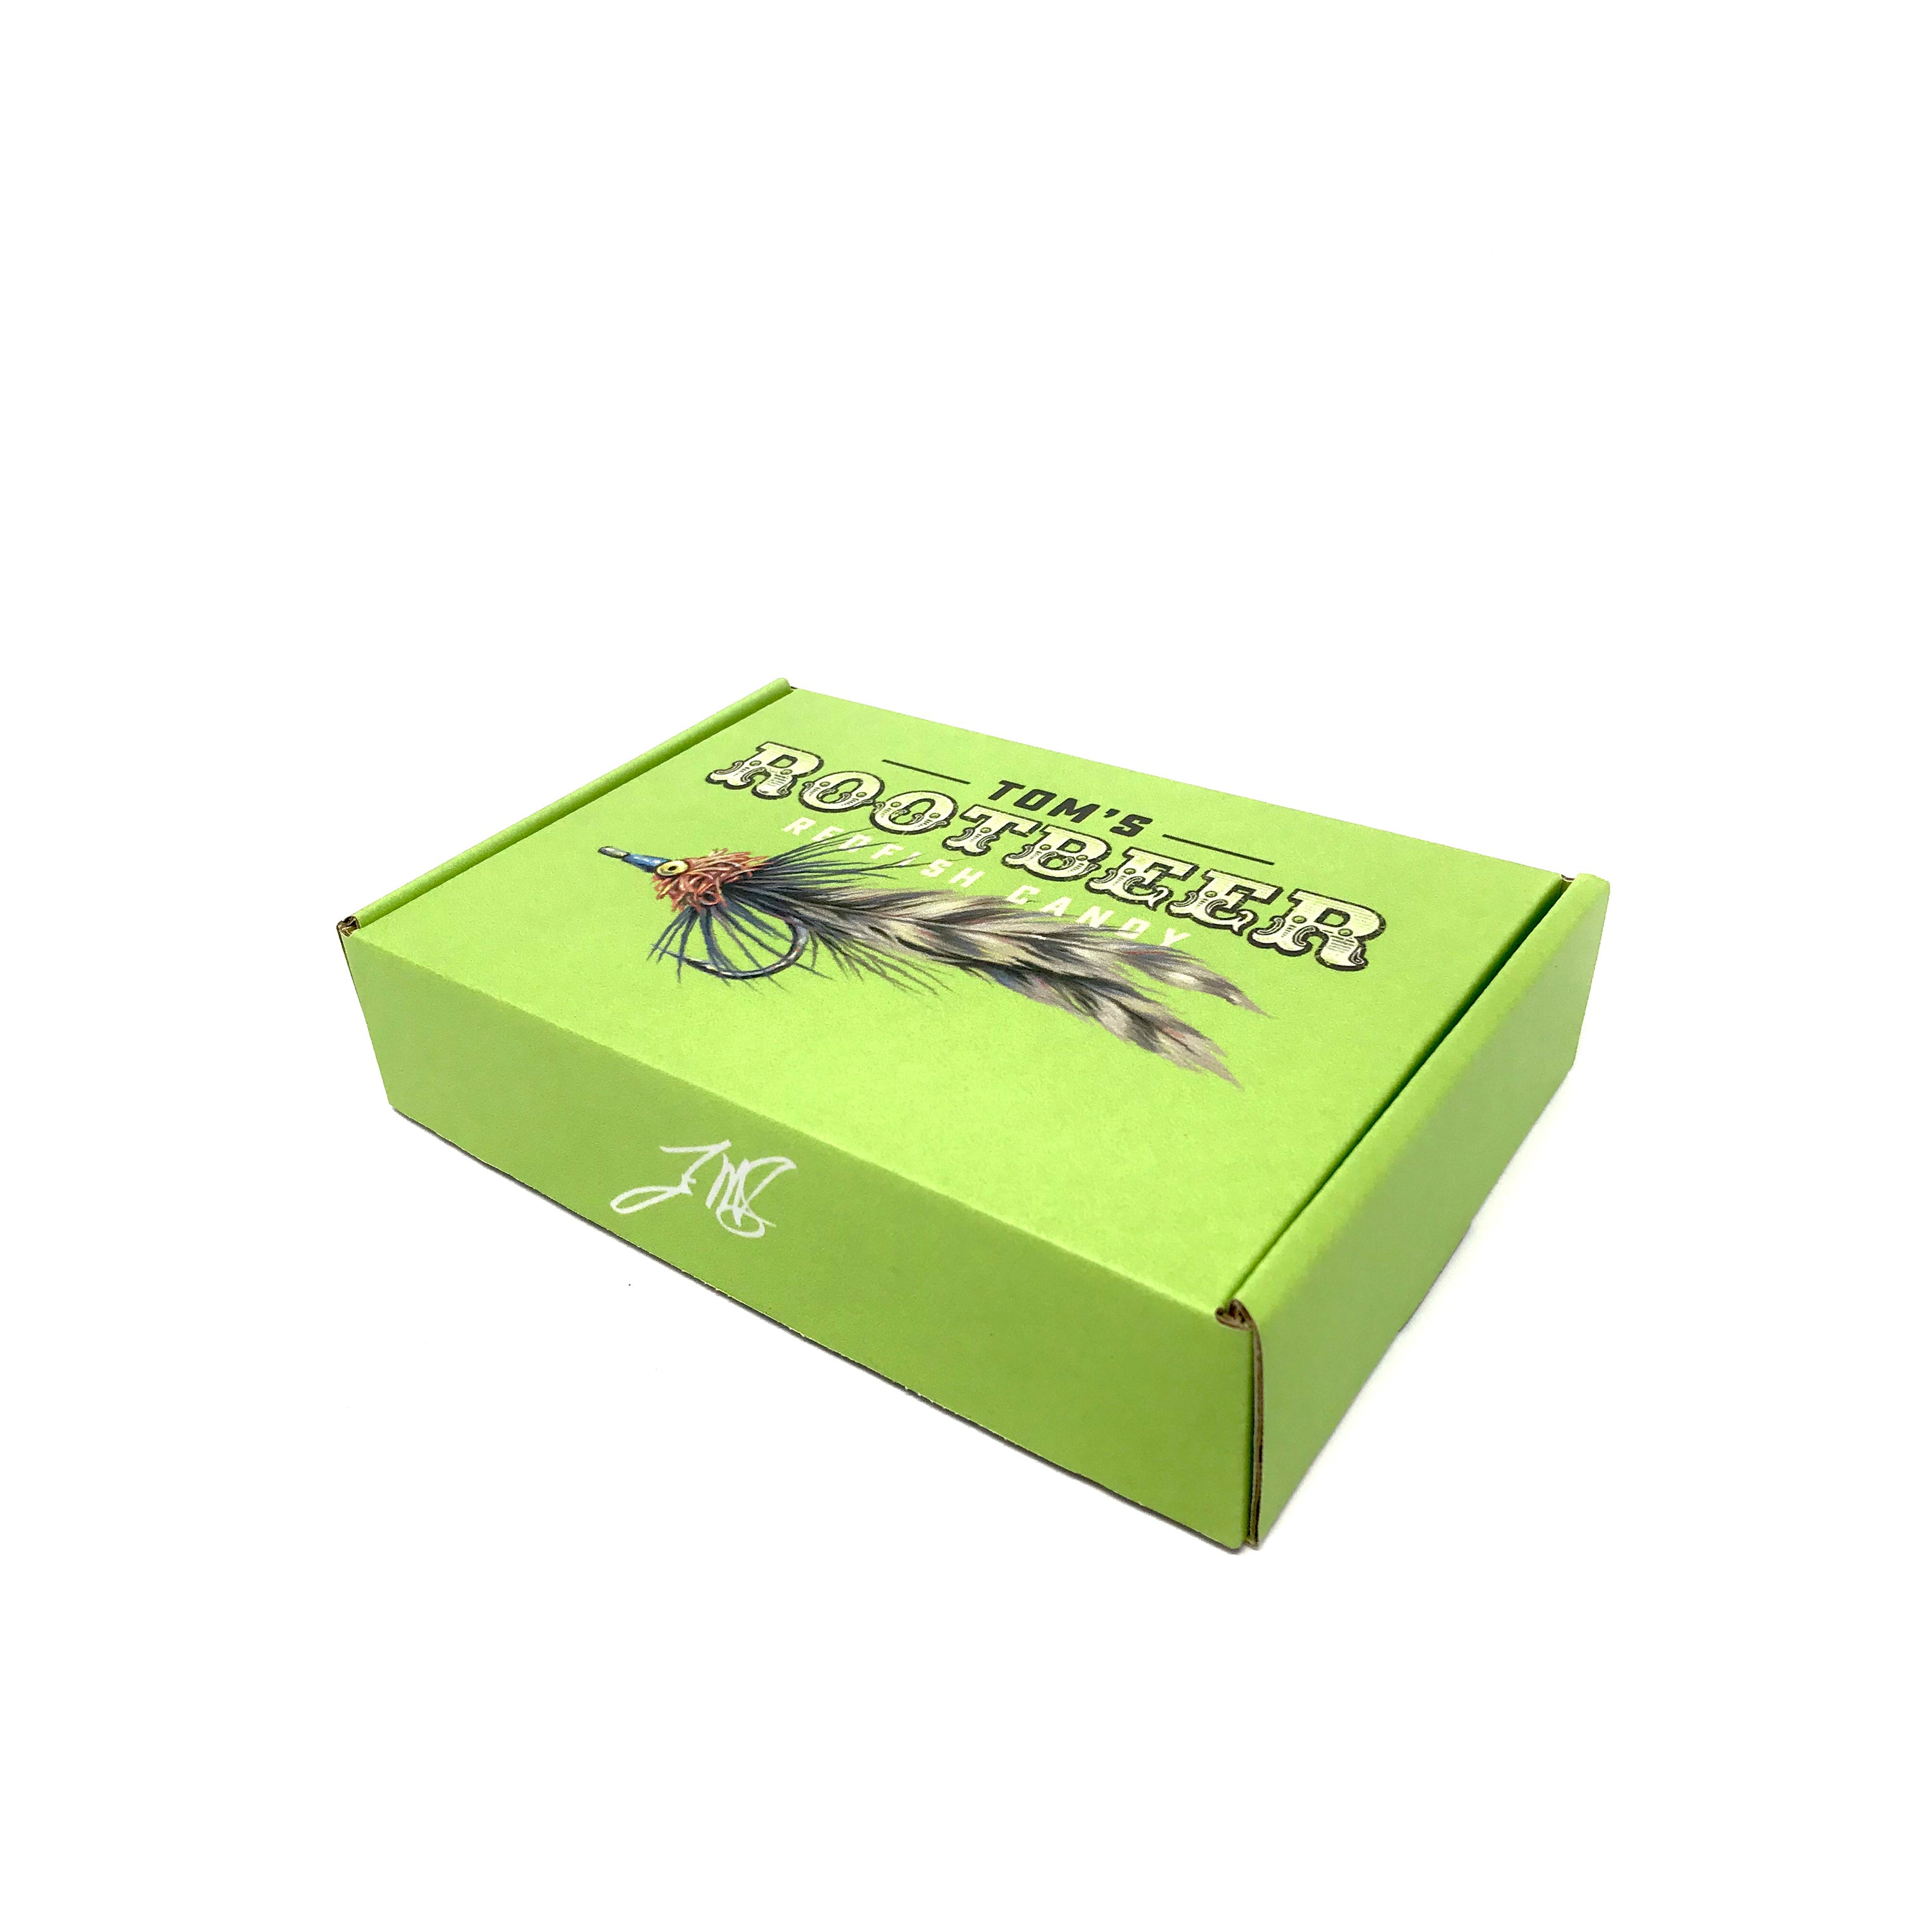 Mangrove Outfitters At-Home Fly Tying Kit – Mangrove Outfitters Fly Shop